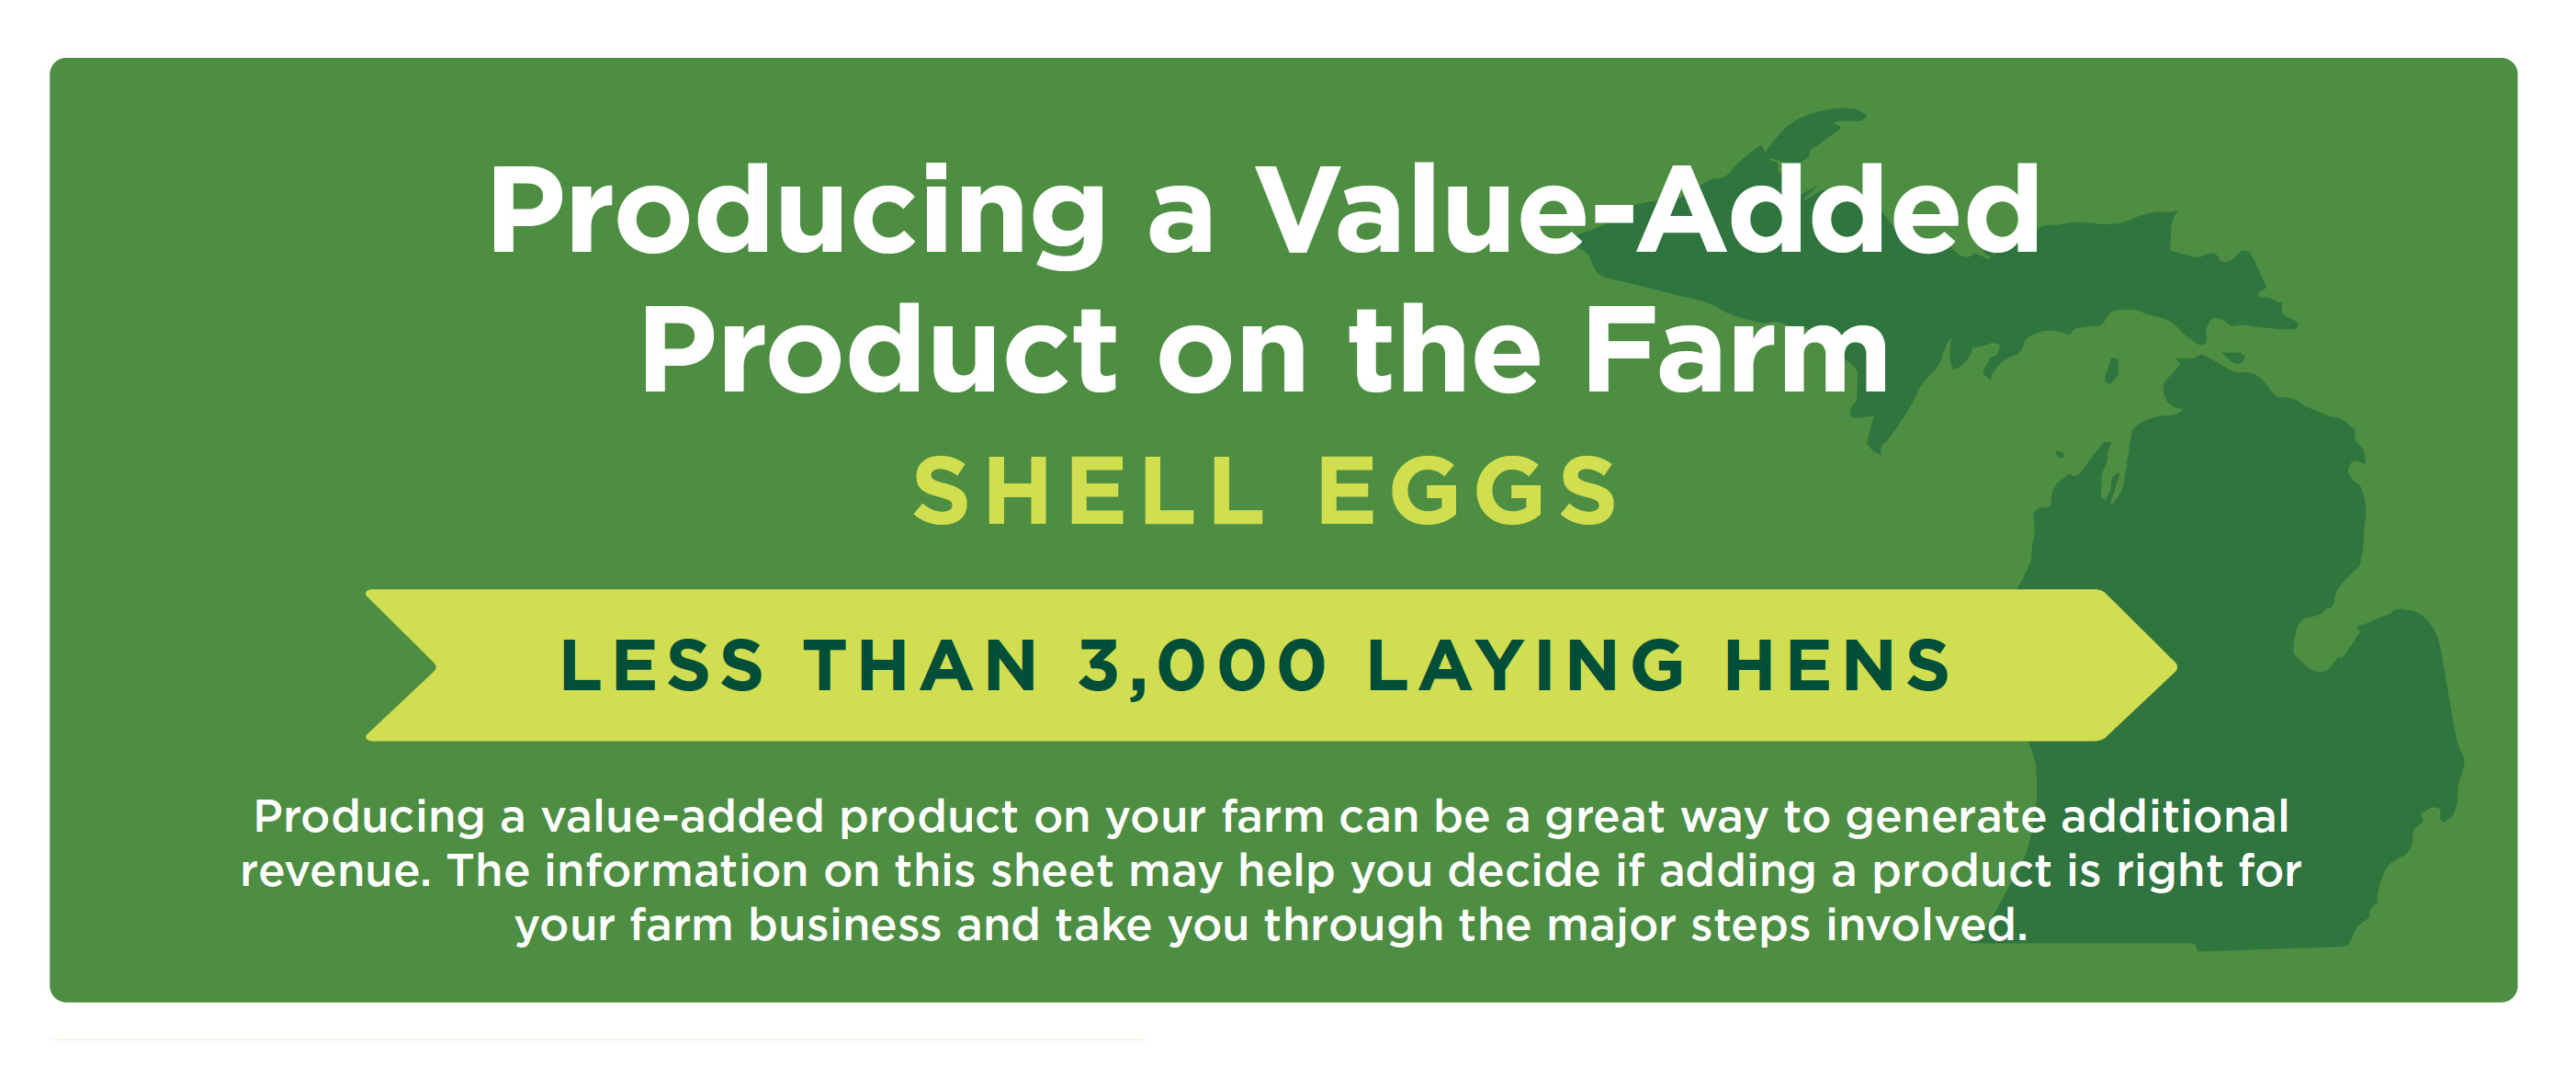 Producing a Value-Added Product on the Farm: Shell Eggs - Less than 3,000 Laying Hens